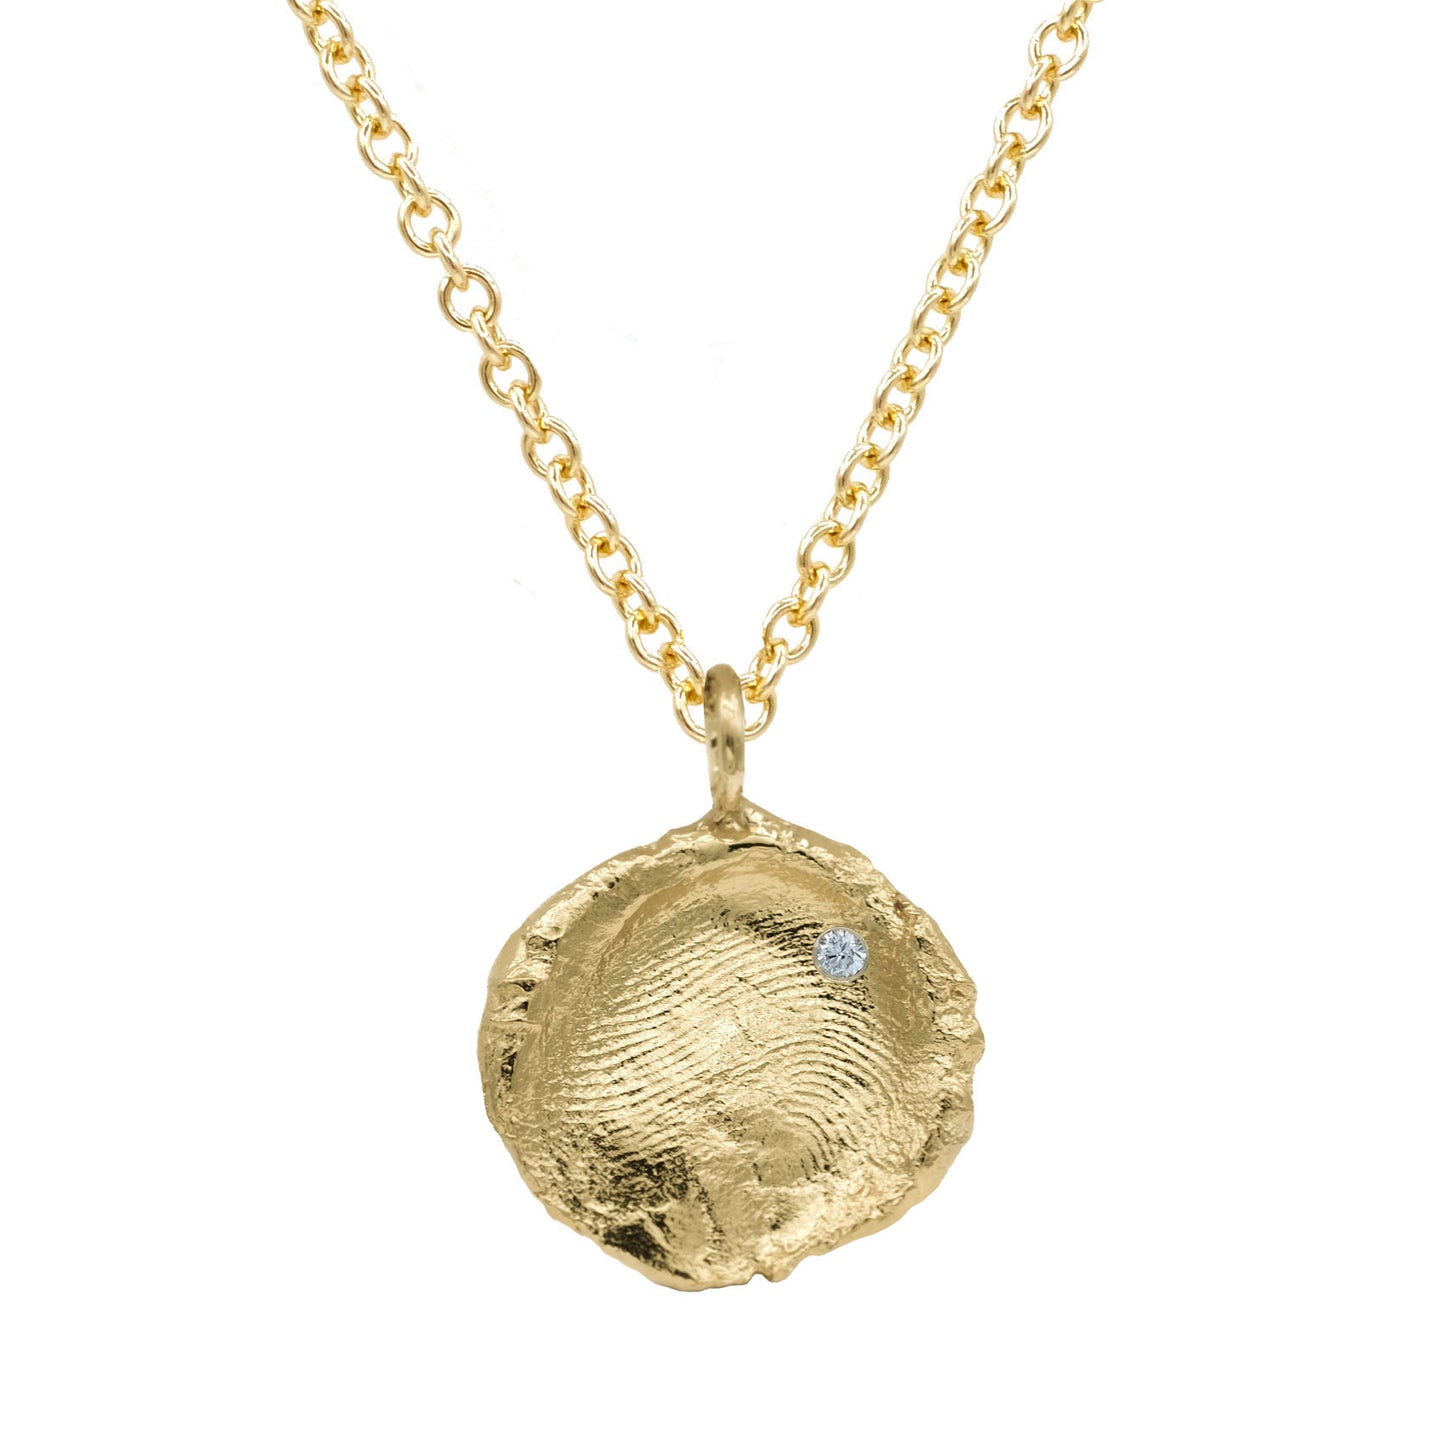 Fingerprint Necklace in solid gold on 1.5mm chain with a diamond